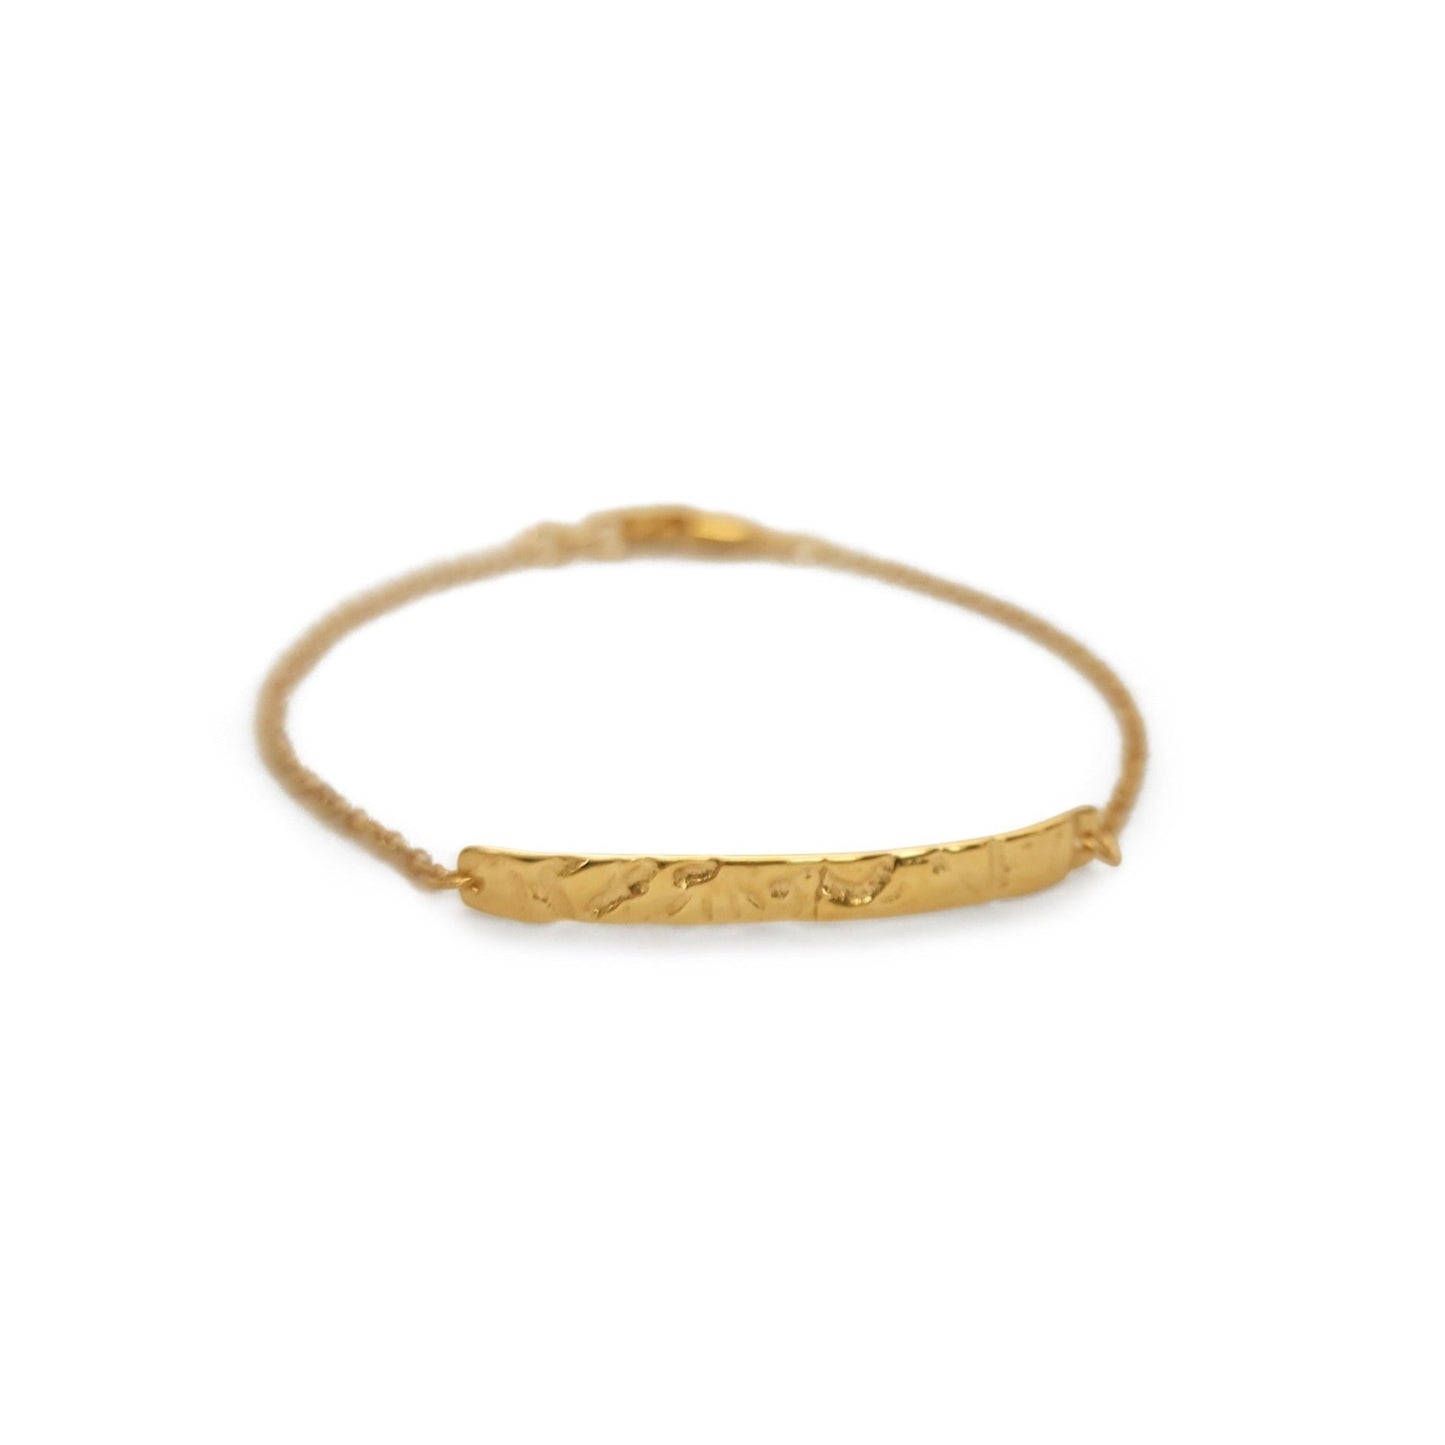 gold plated silver Kayla adjustable bracelet with natural wood texture